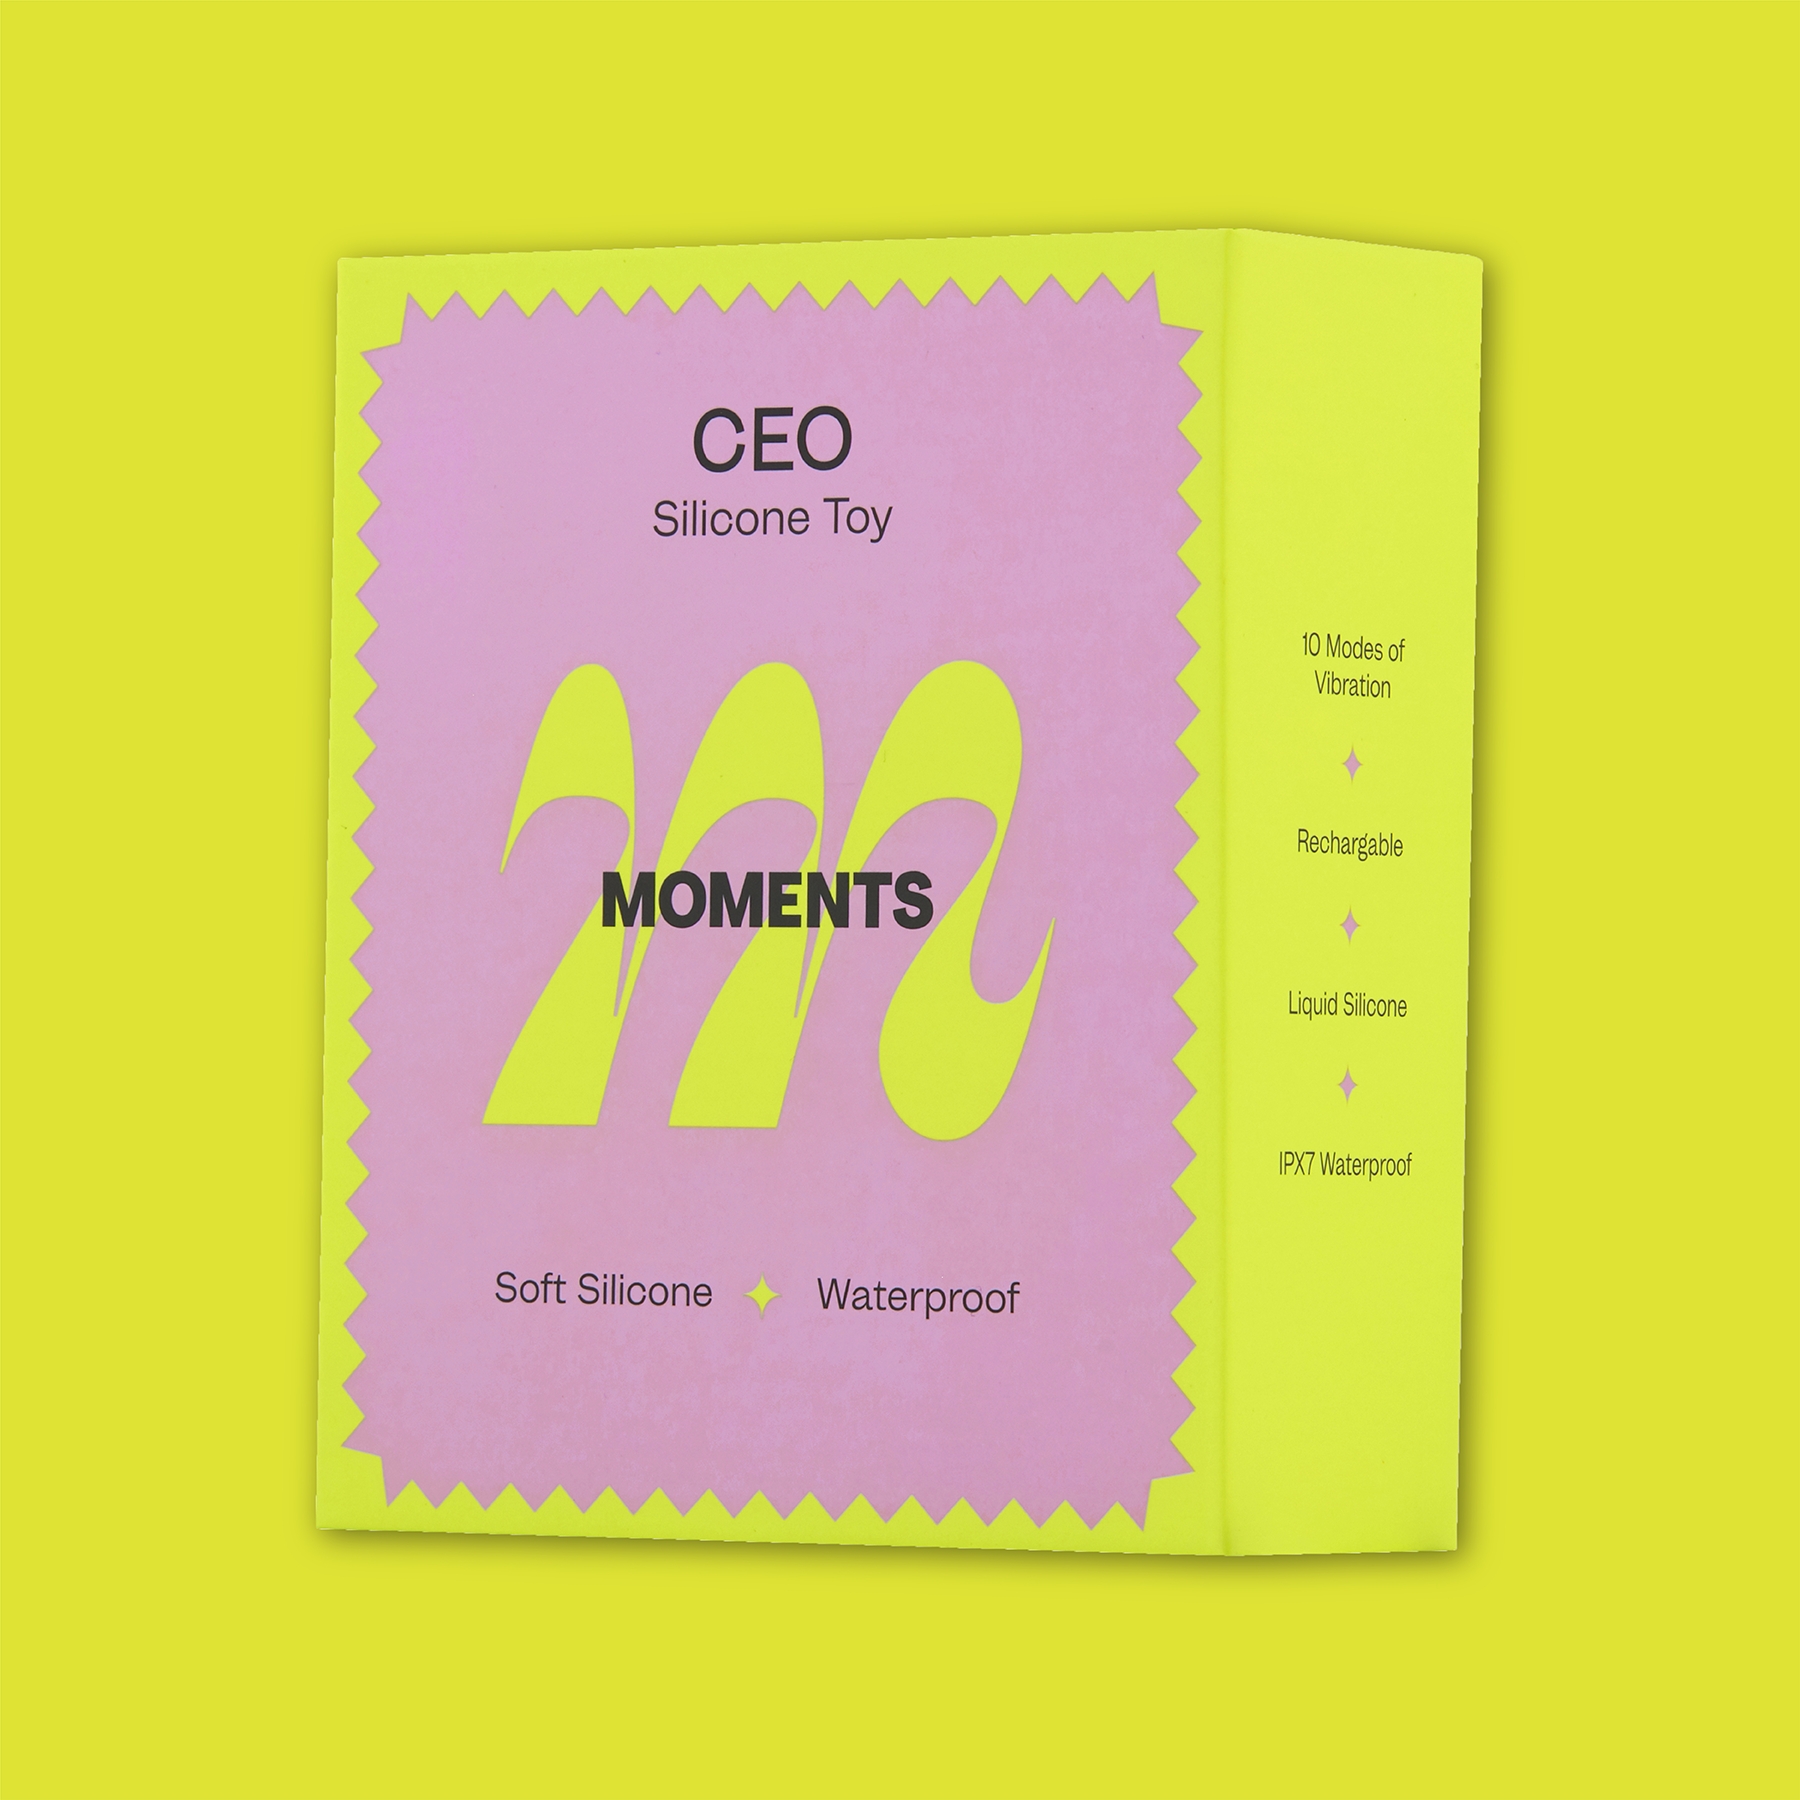 Packaging for the CEO vibrator with 'Moments' branding